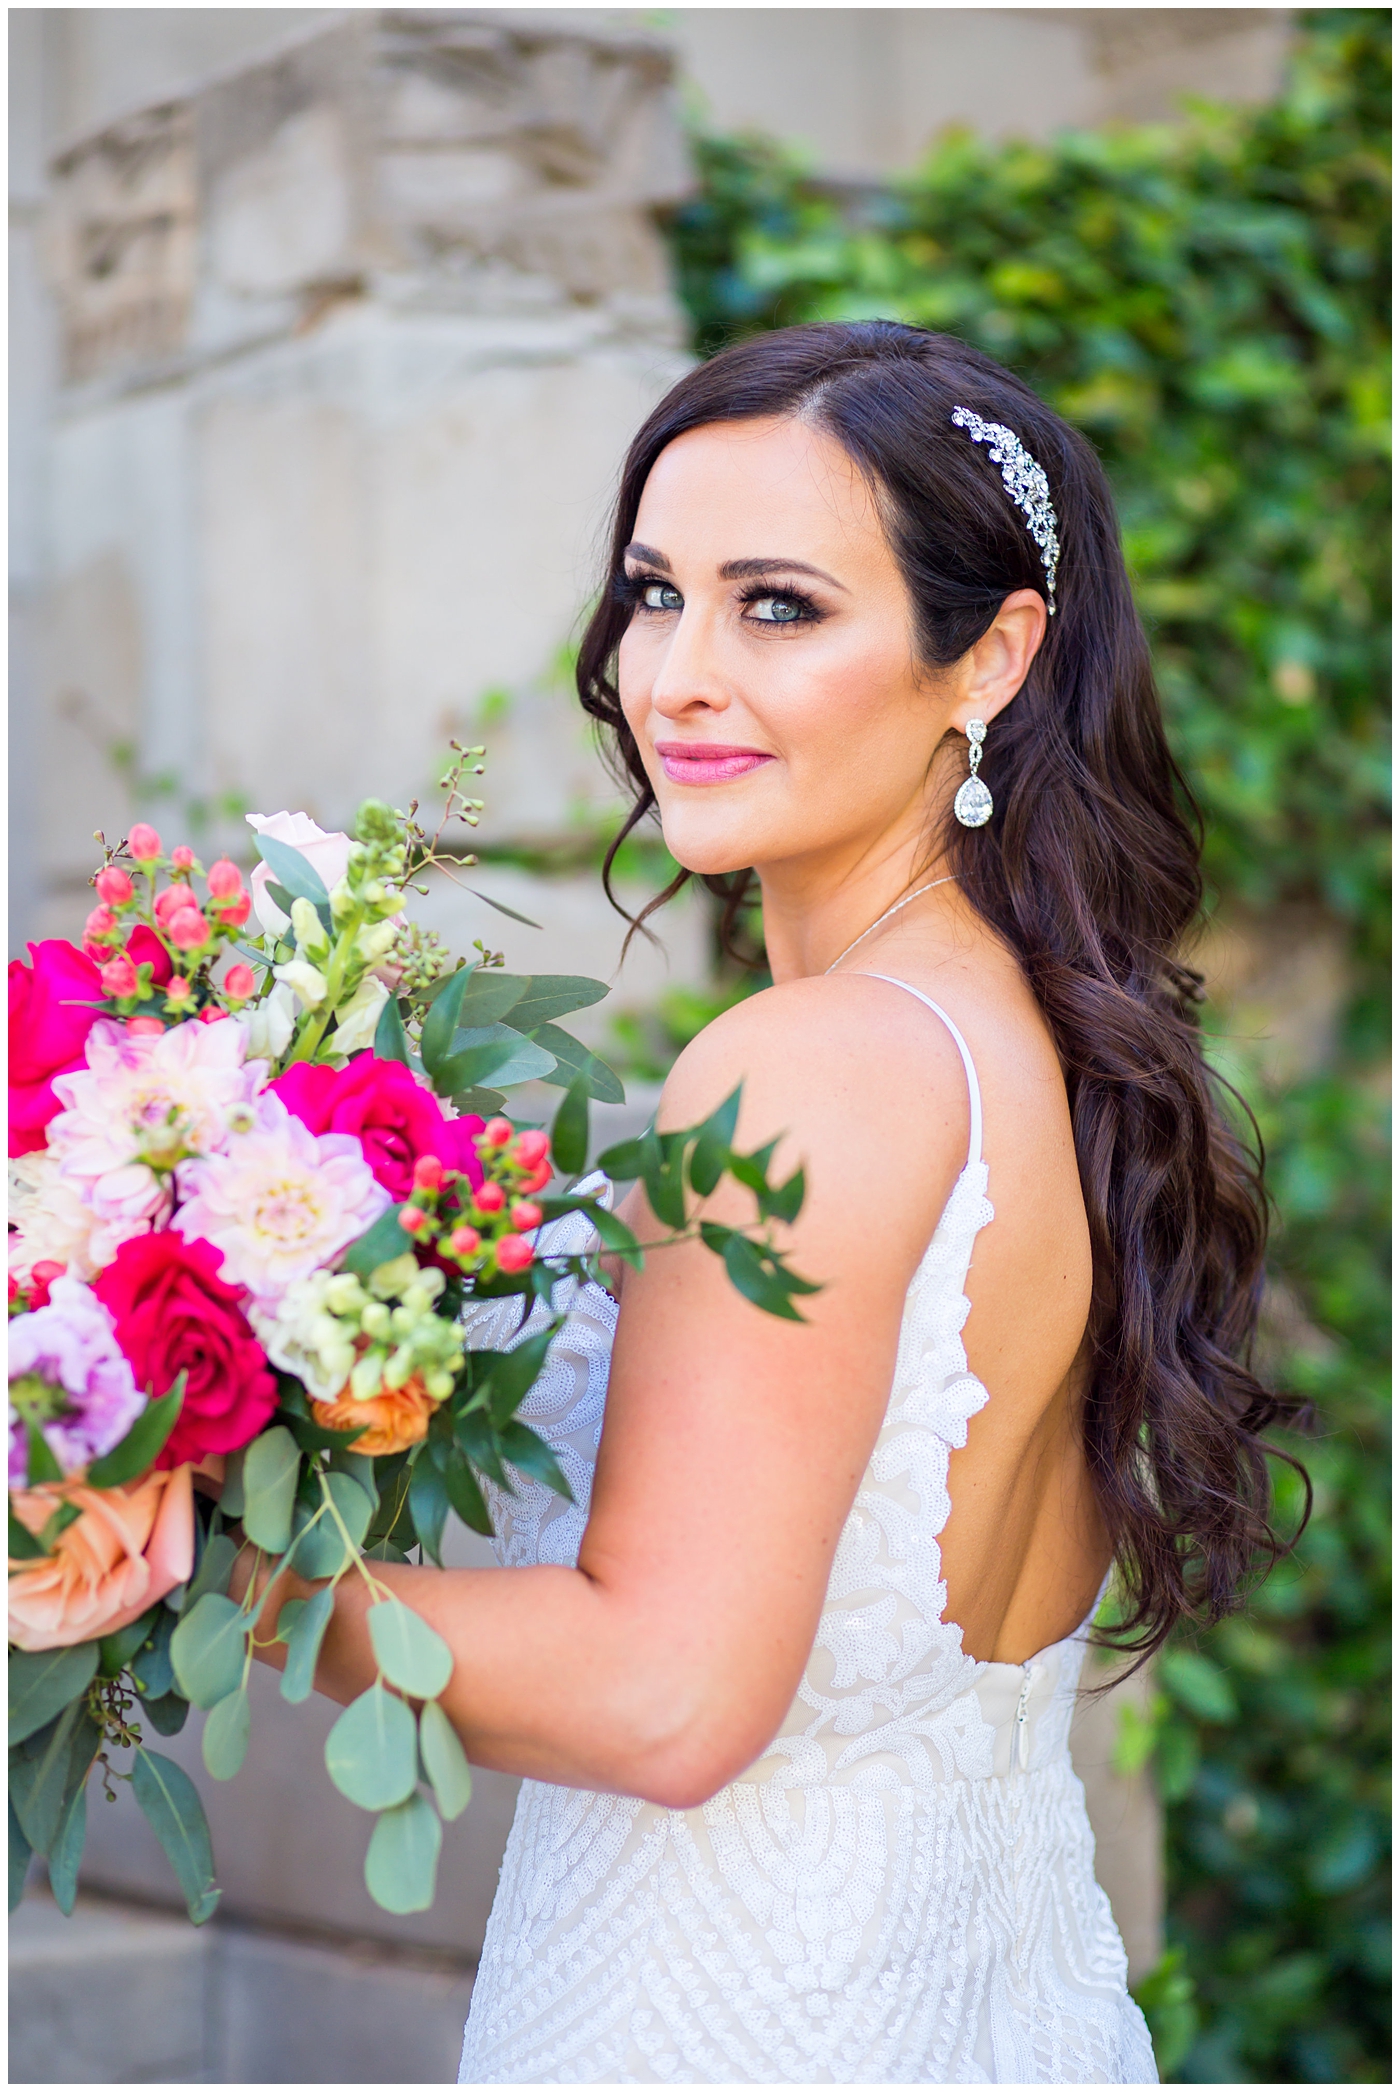 brunette bride in wedding dress with thin straps with bright color roses, dahlia, snap dragons loose bouquet wedding day portrait